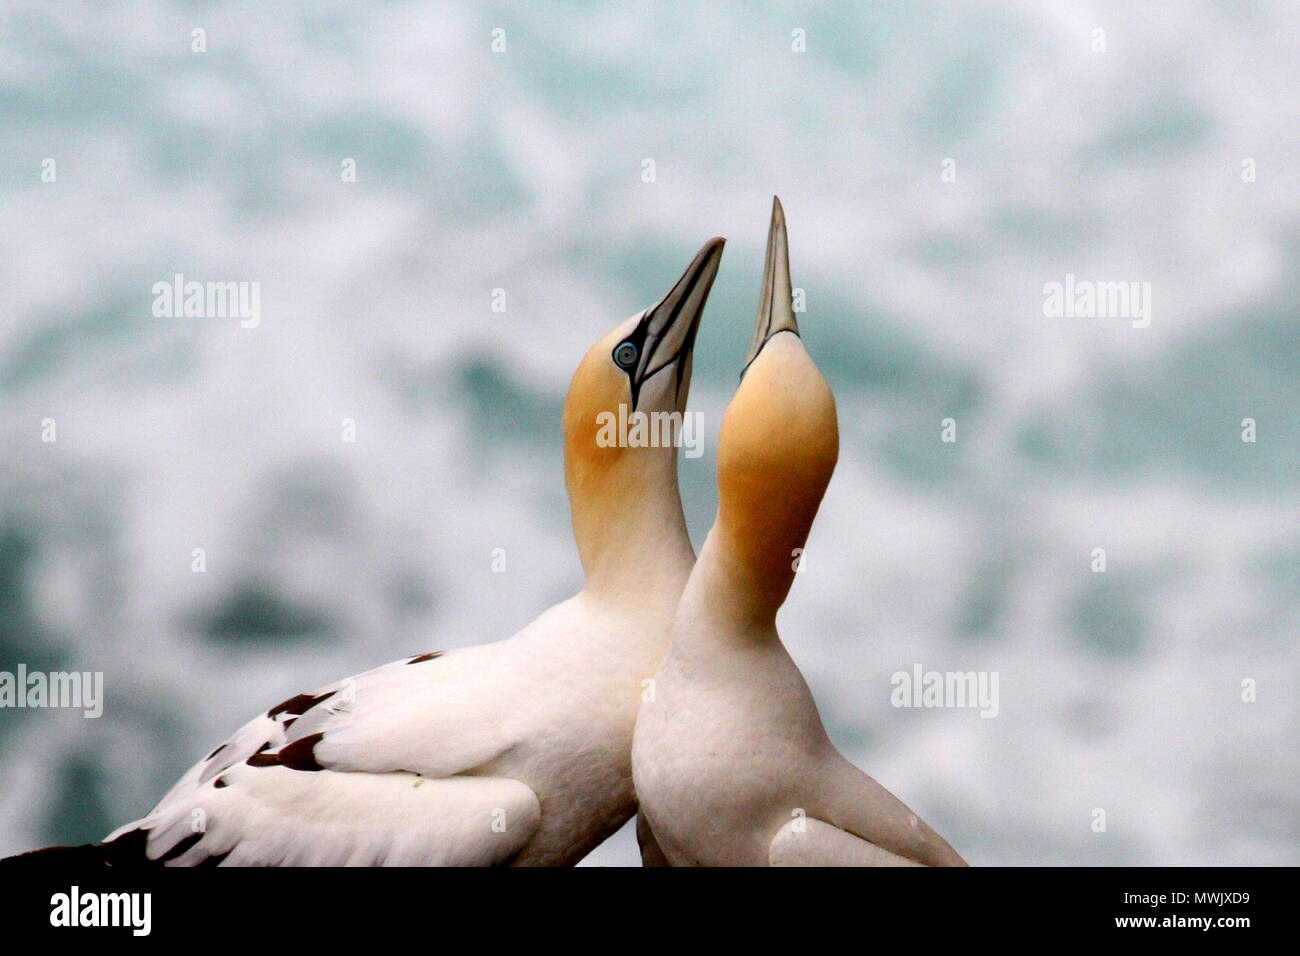 One of the largest seabirds of the North Atlantic, the northern gannet is spectacular as it plunges into the sea in pursuit of fish. Stock Photo